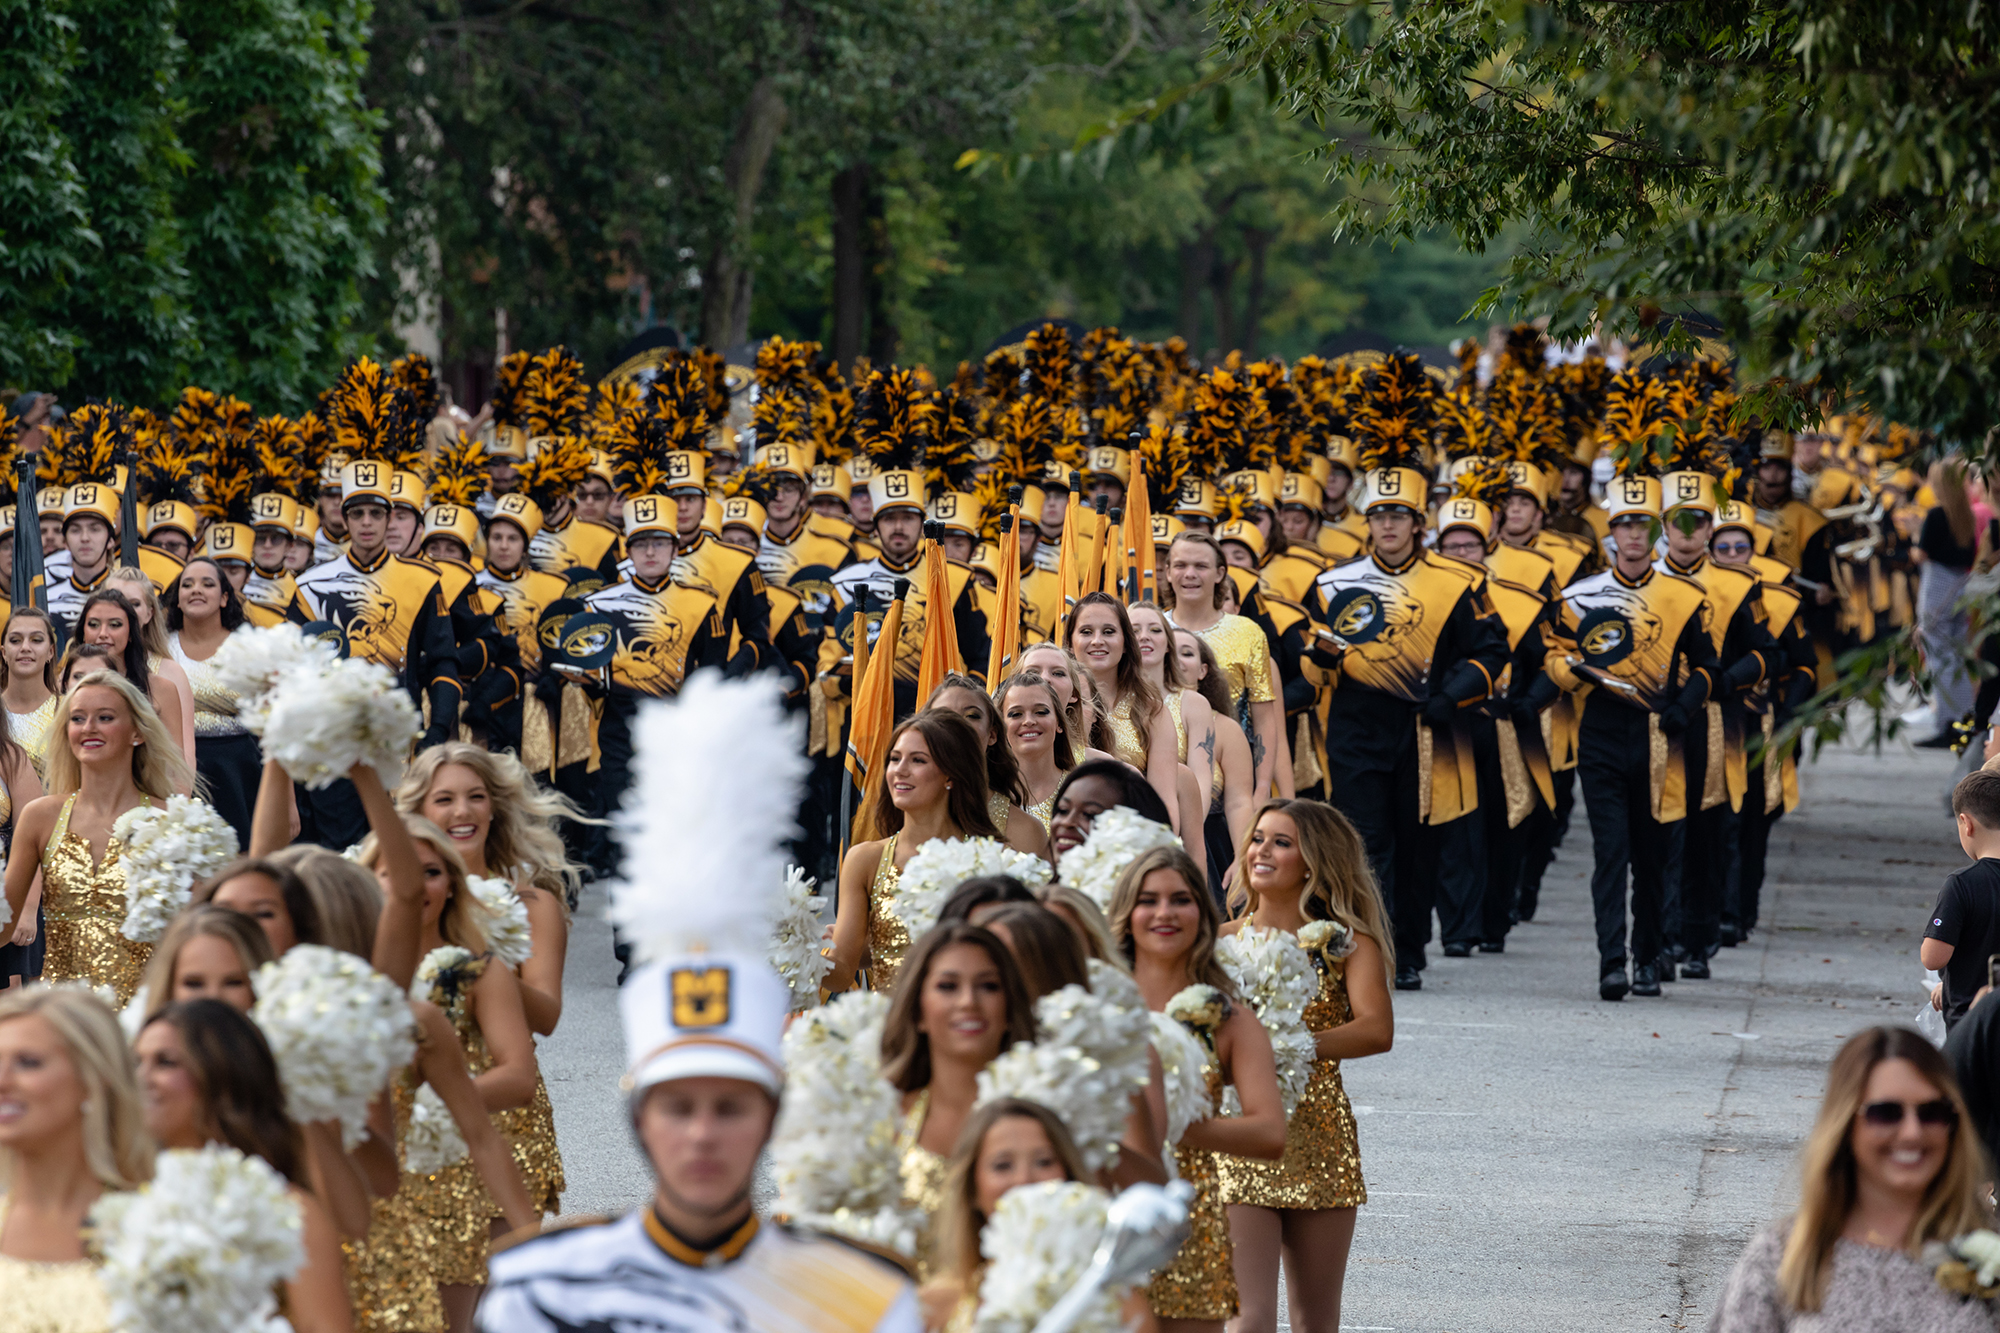 marching mizzou and the golden girls fill the streets during the parade